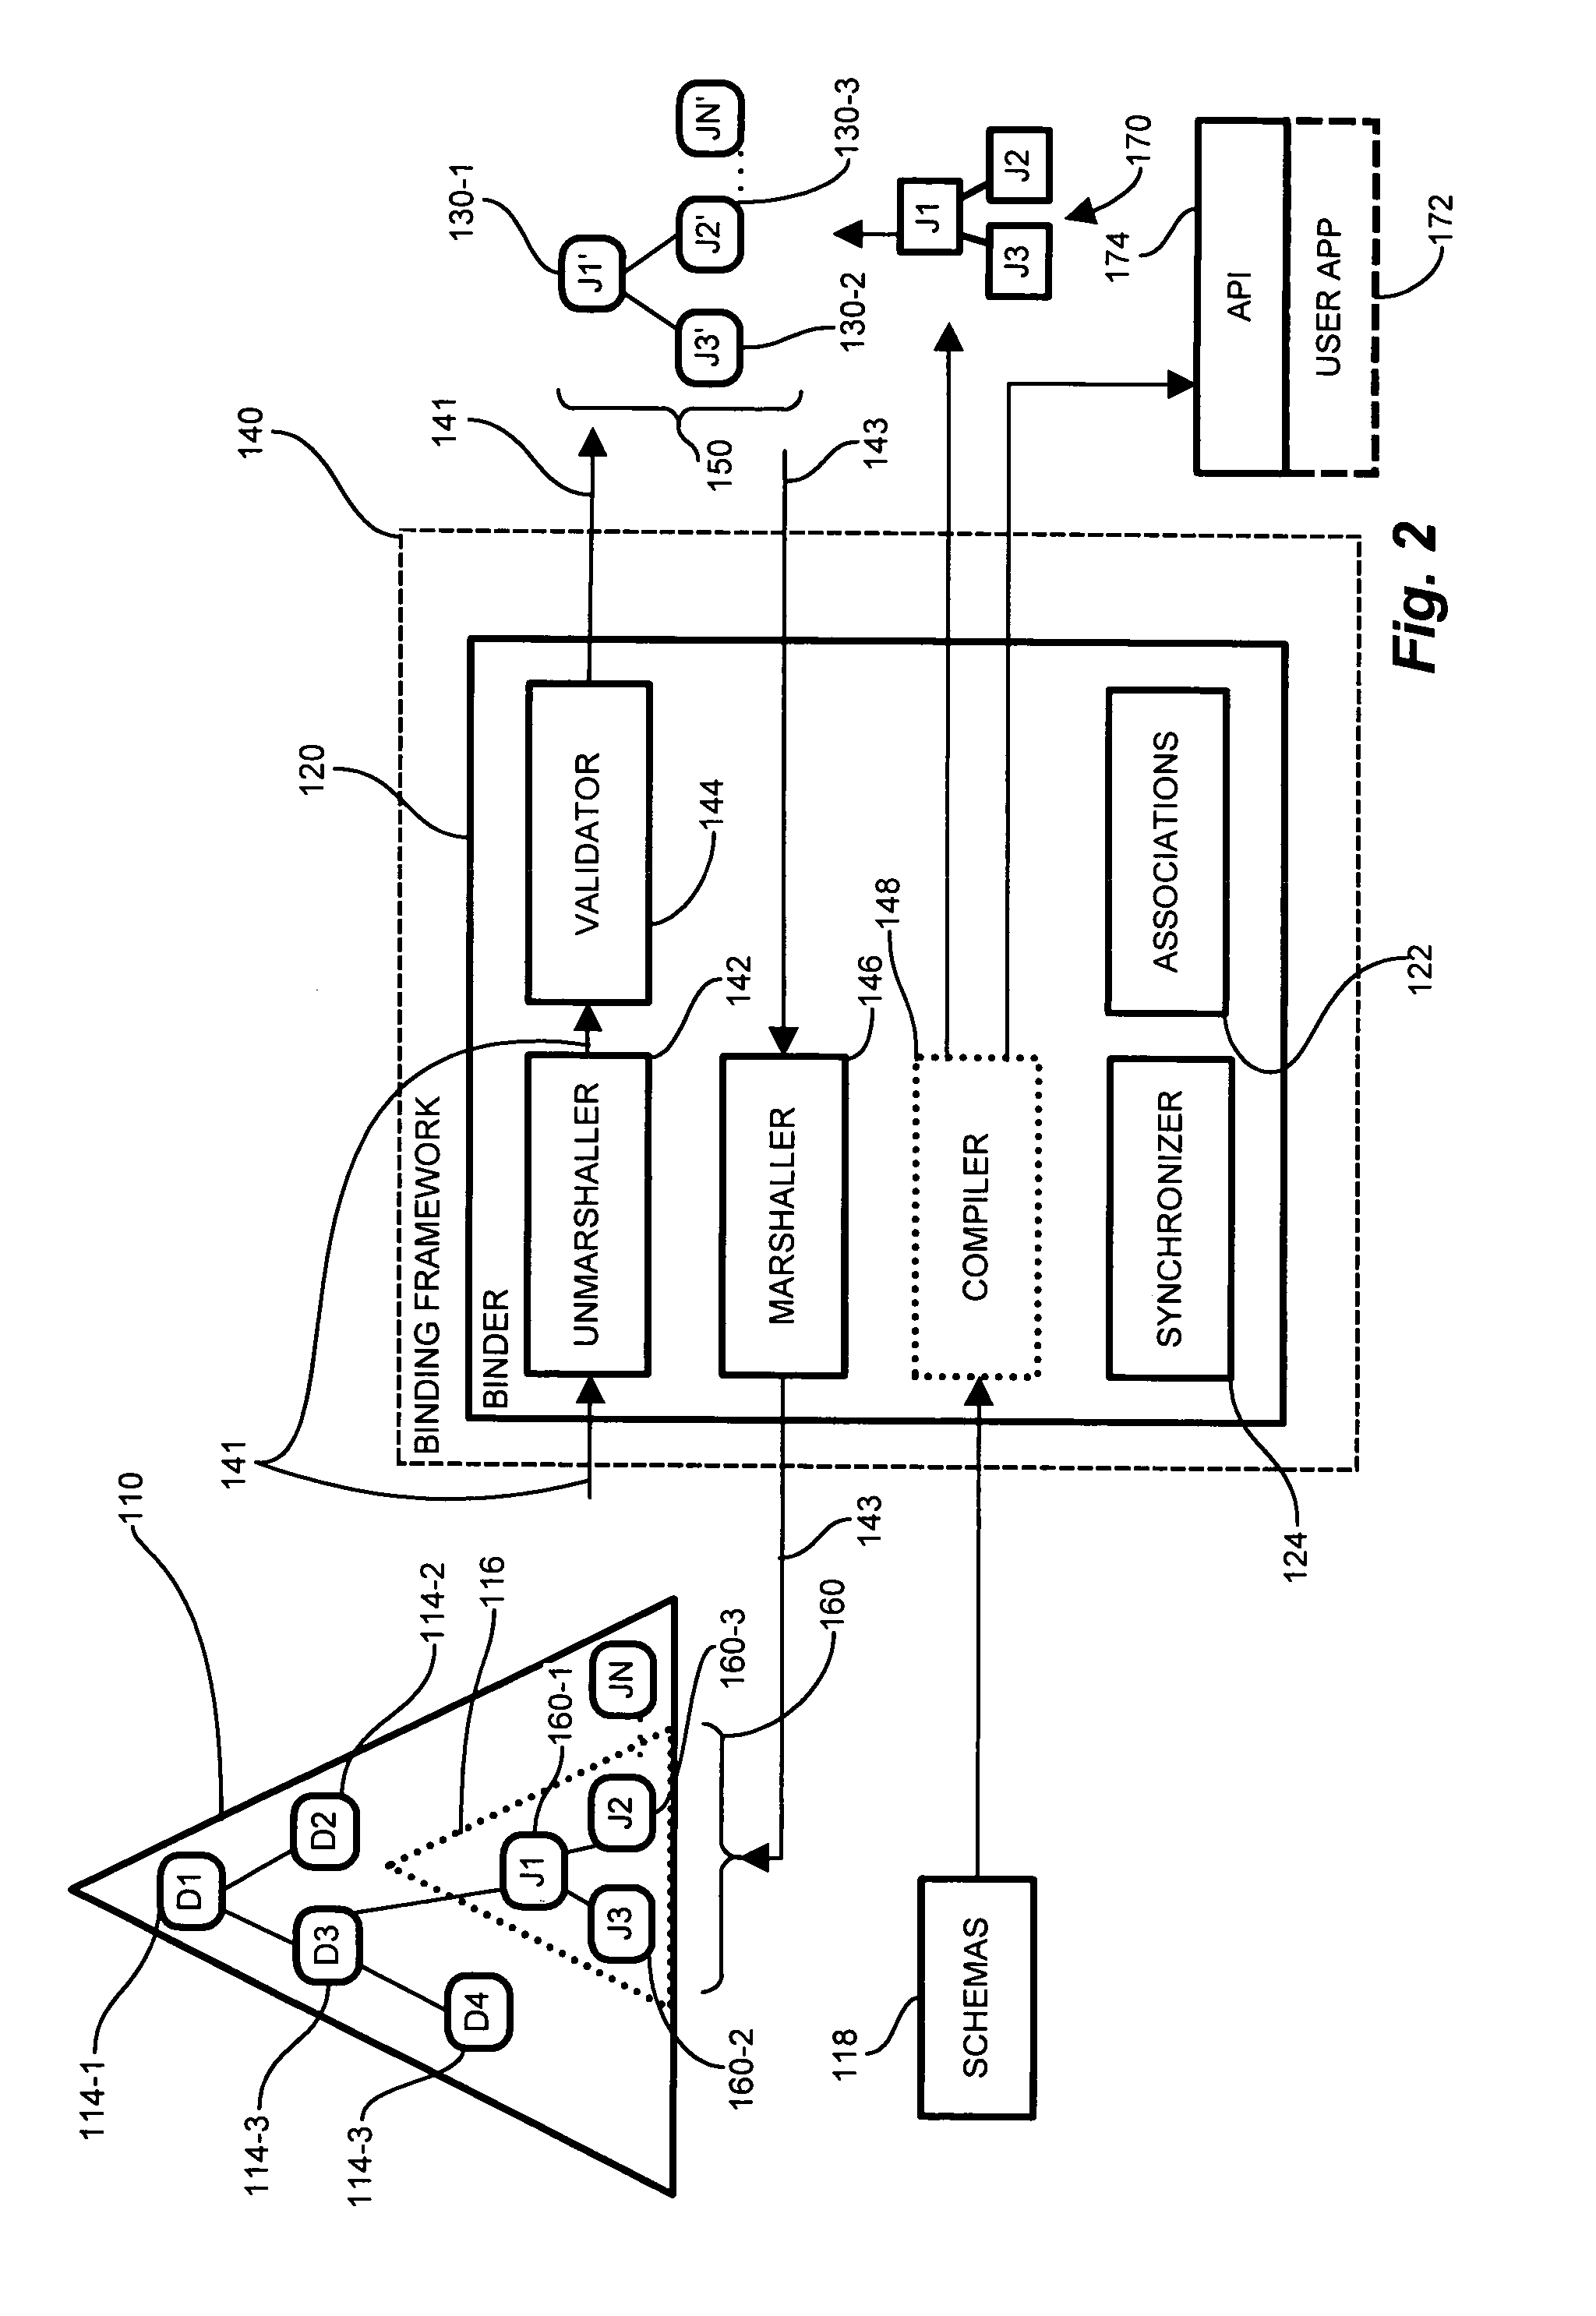 System and method for maintaining alternate object views